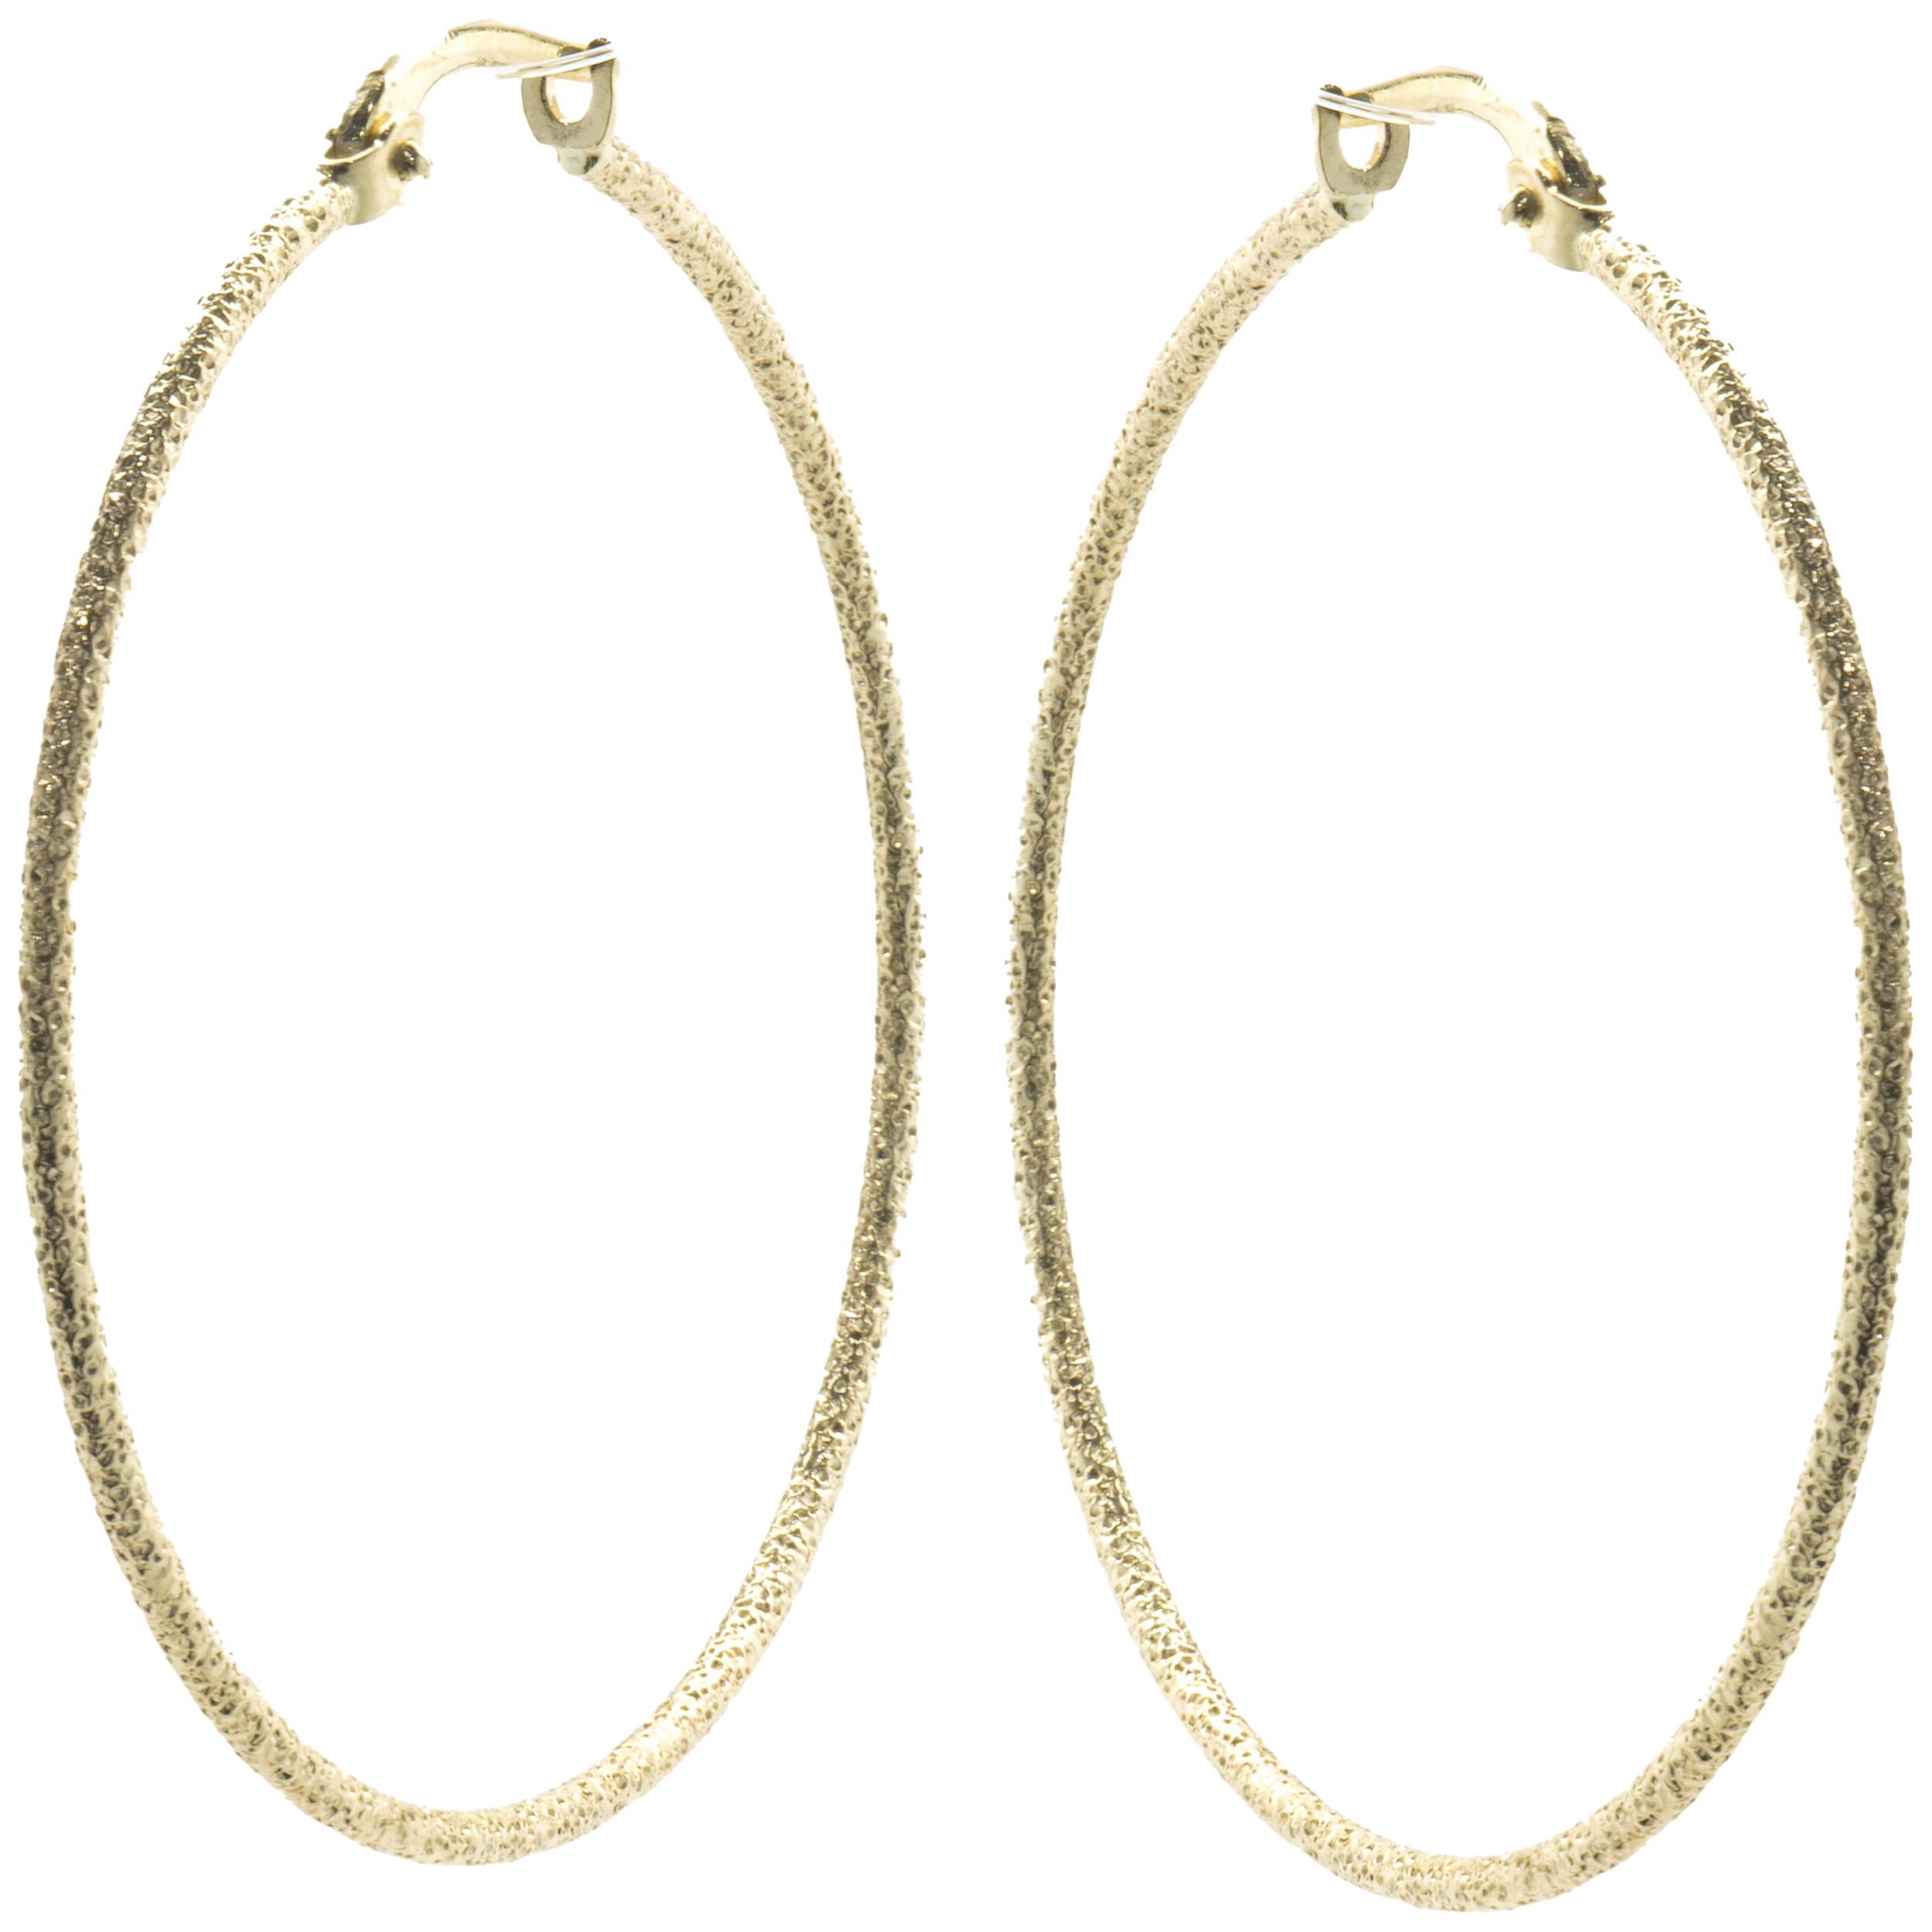 Material: 14K yellow gold
Dimensions: earrings measure 38mm in length
Weight:  3.27 grams